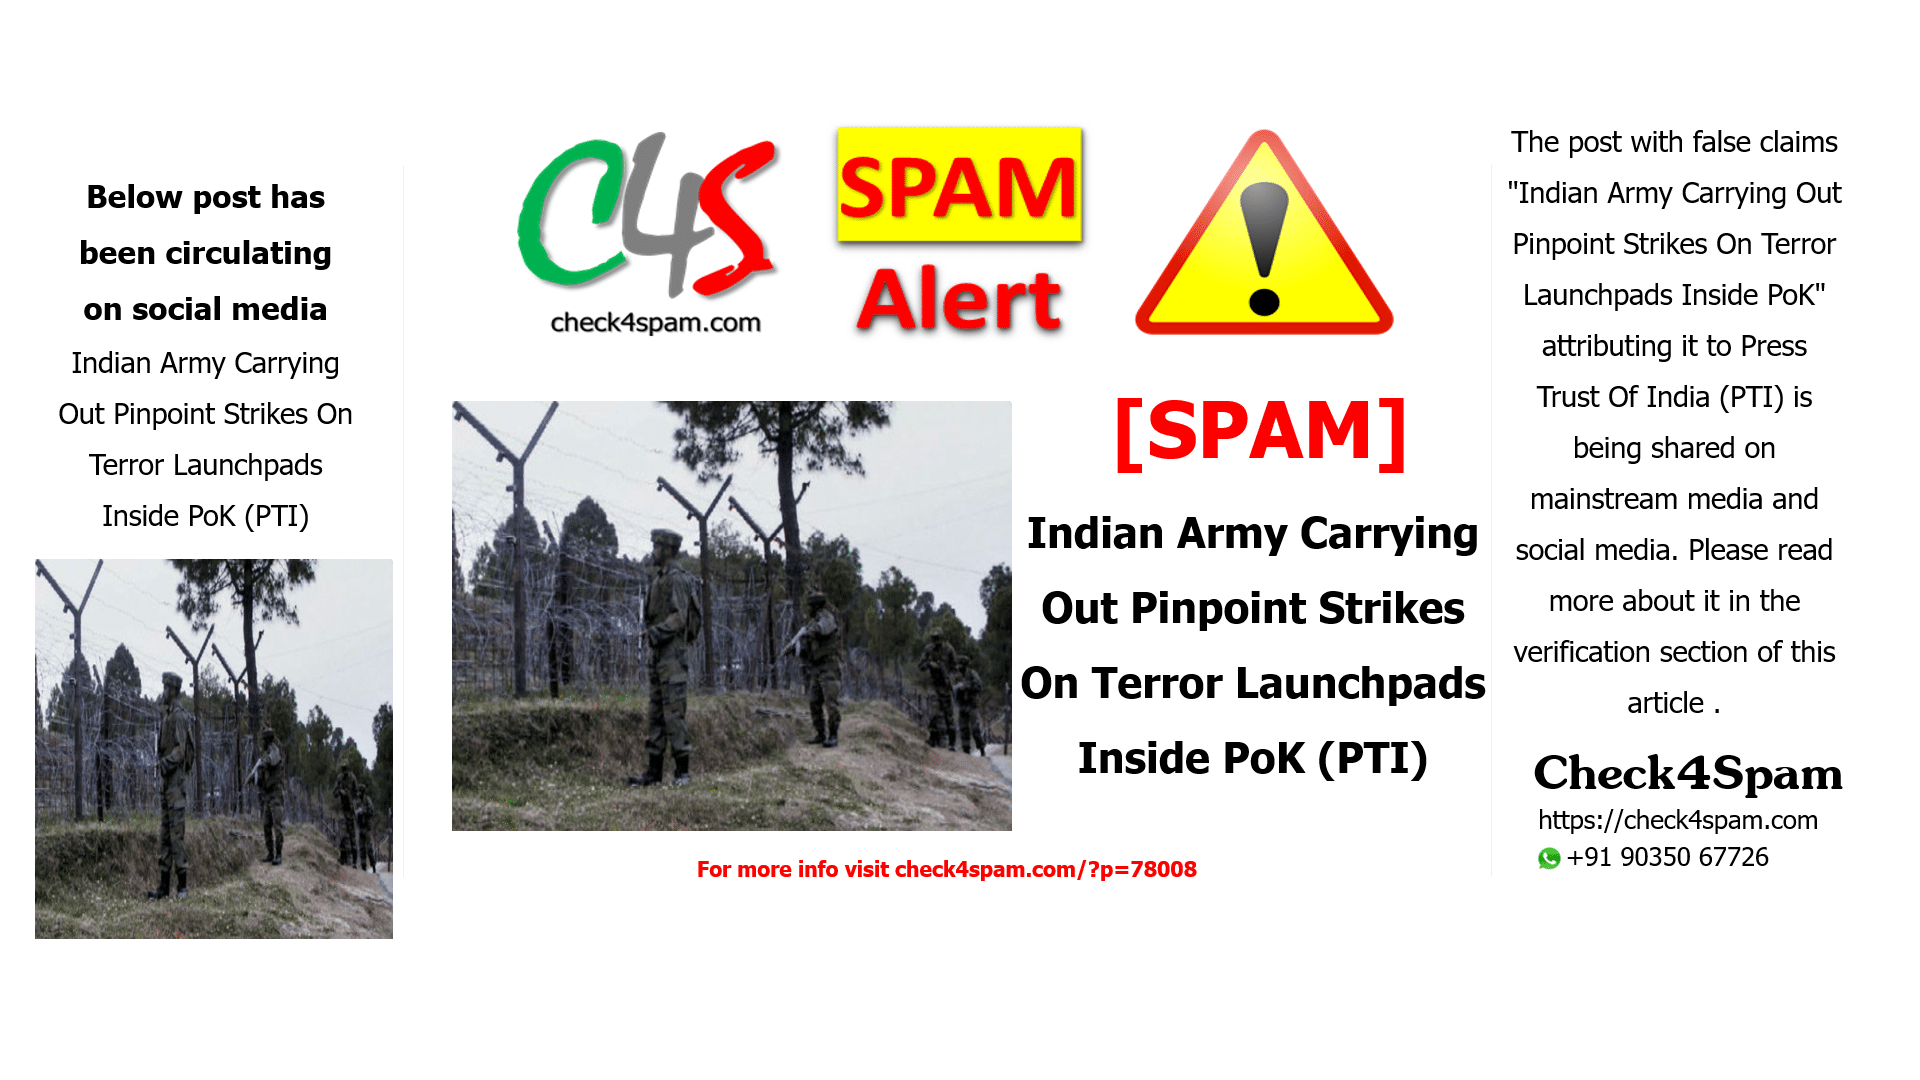 Indian Army Carrying Out Pinpoint Strikes On Terror Launchpads Inside PoK (PTI)